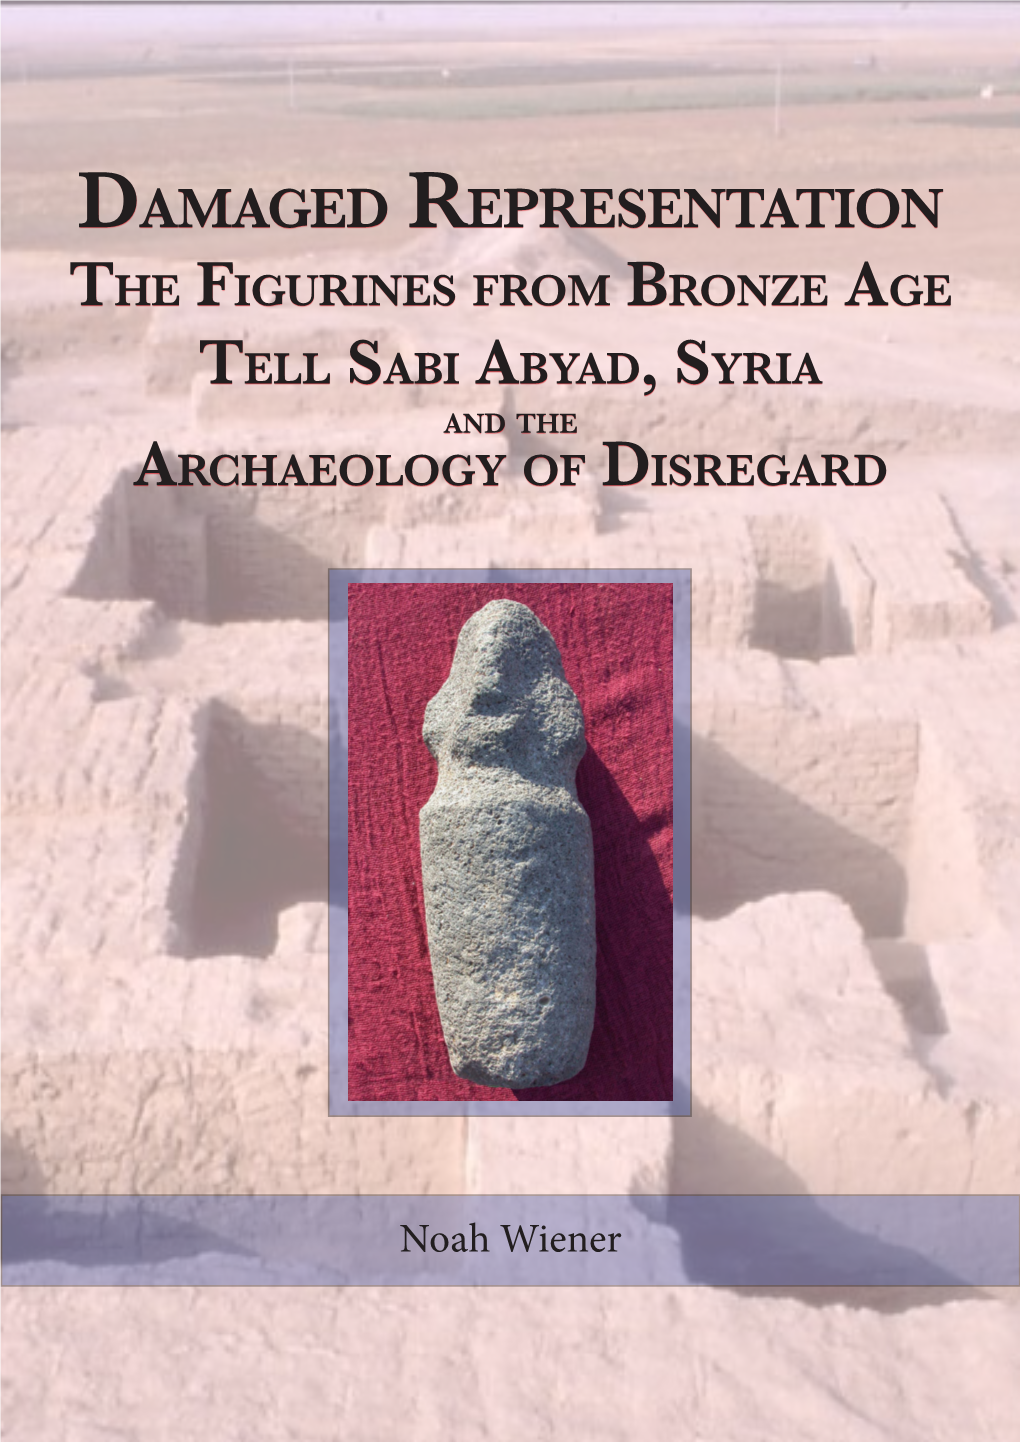 Damaged Representation: the Figurines from Bronze Age Tell Sabi Abyad, Syria, and the Archaeology of Disregard